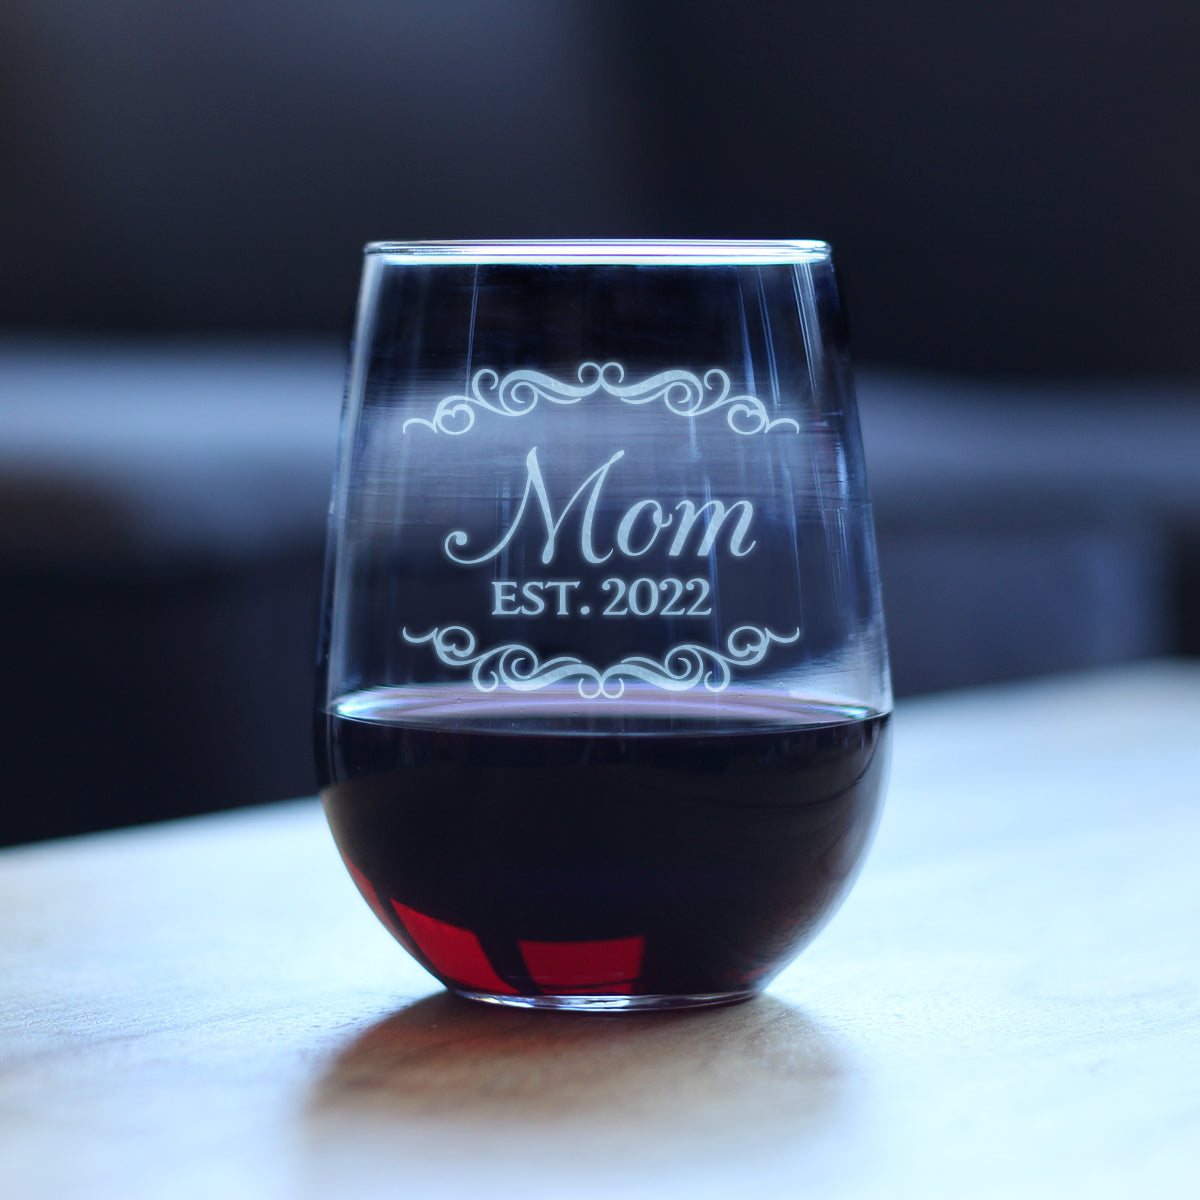 Mom Est 2022 - New Mother Stemless Wine Glass Gift for First Time Parents - Decorative 17 Oz Large Glasses